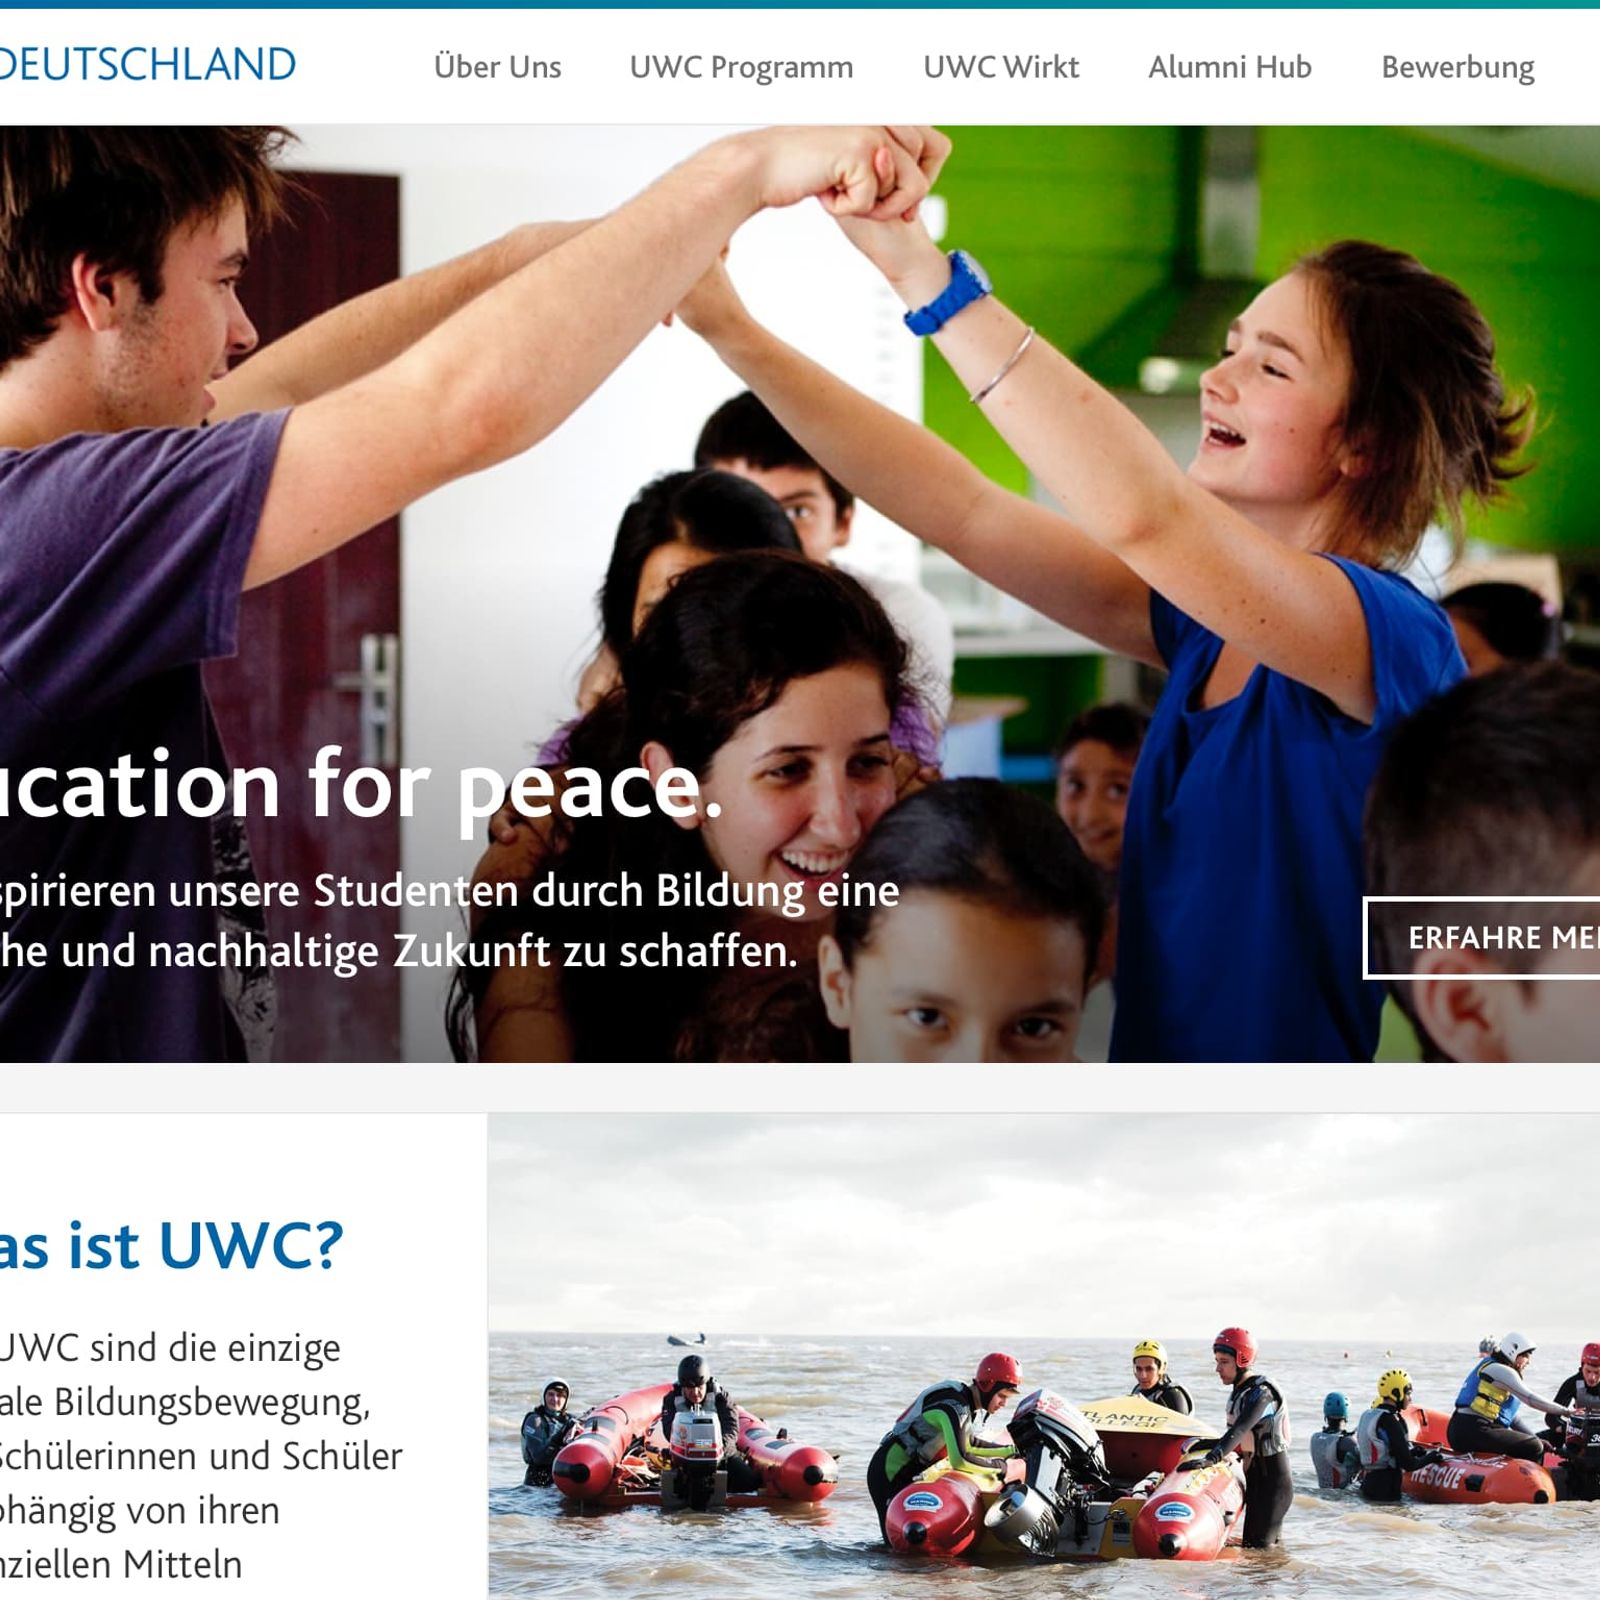 Second mockup of uwc.de. The headline is joined by a smaller subheadline, the content boxes are layed out using the golden ratio